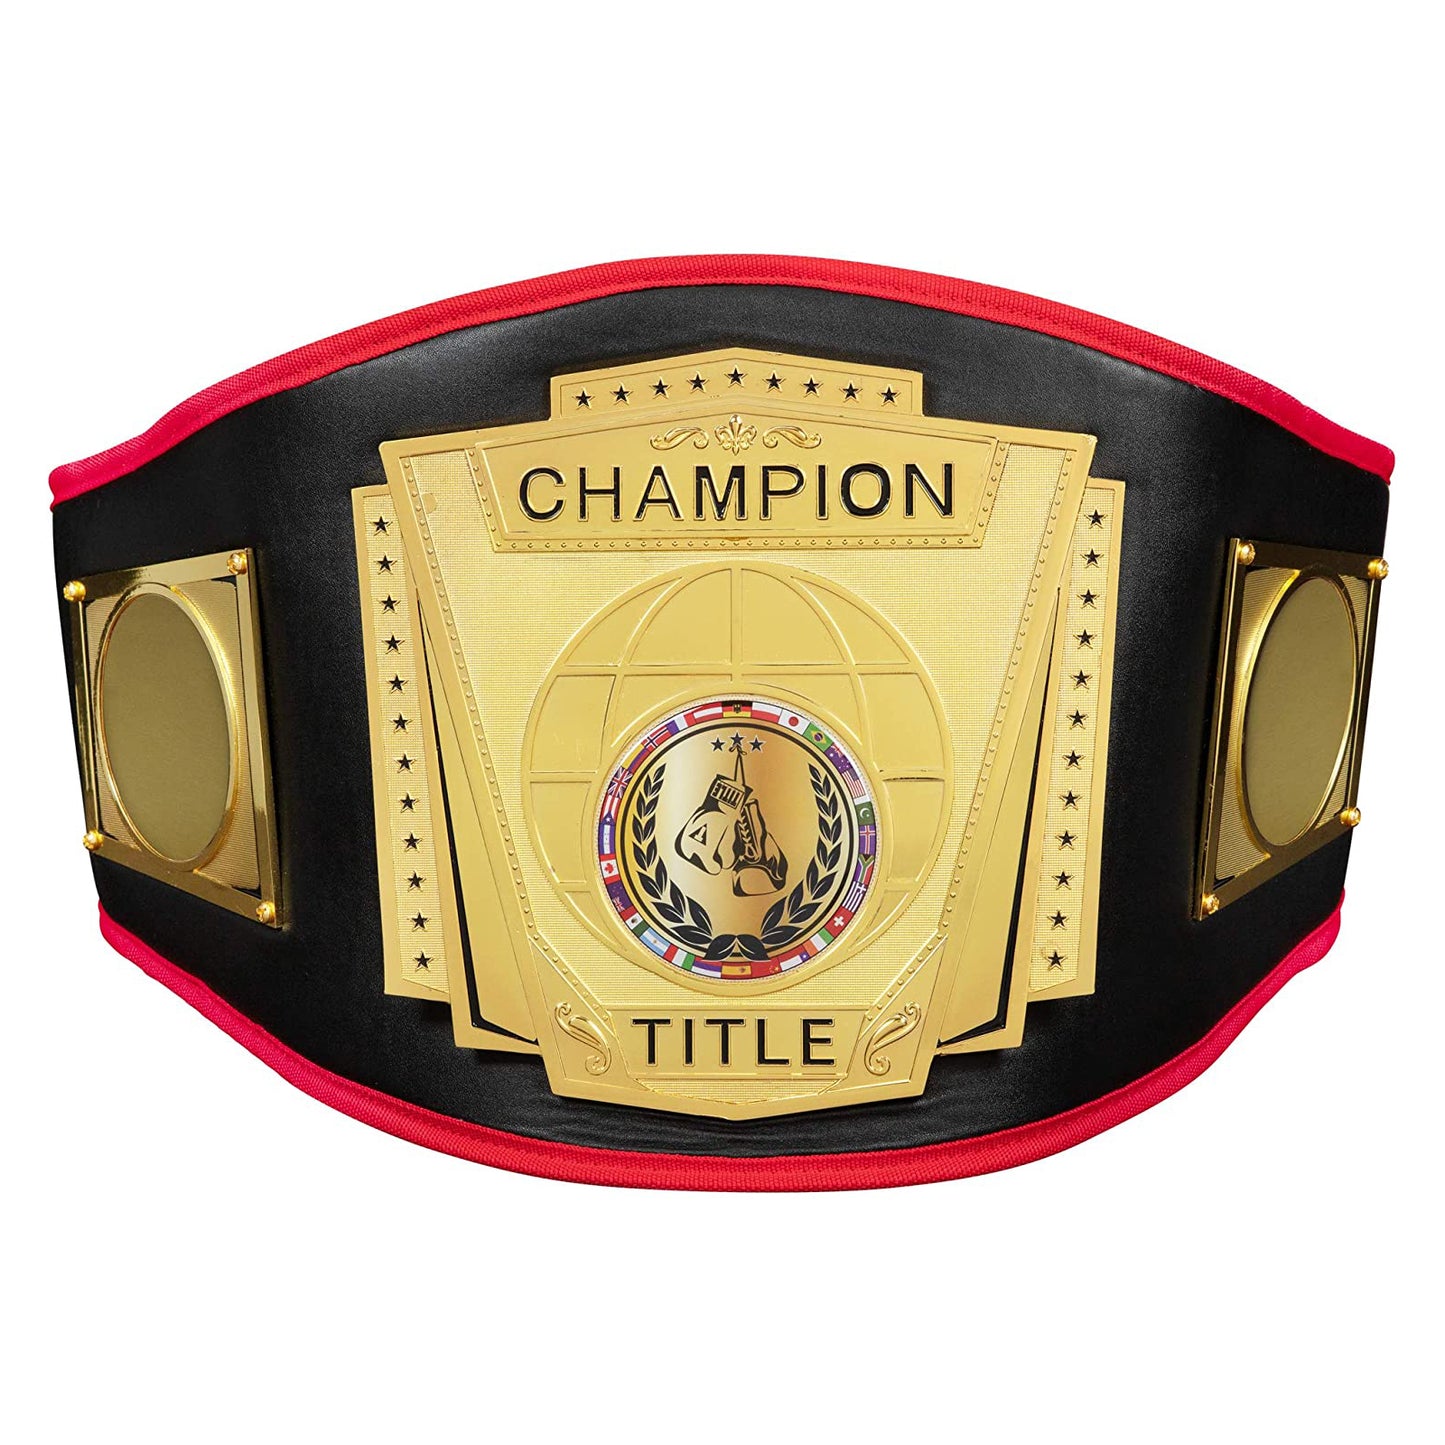 FORCE OF ONE BOXING TITLE CHAMPIONSHIP BELT – Champions Title Belts